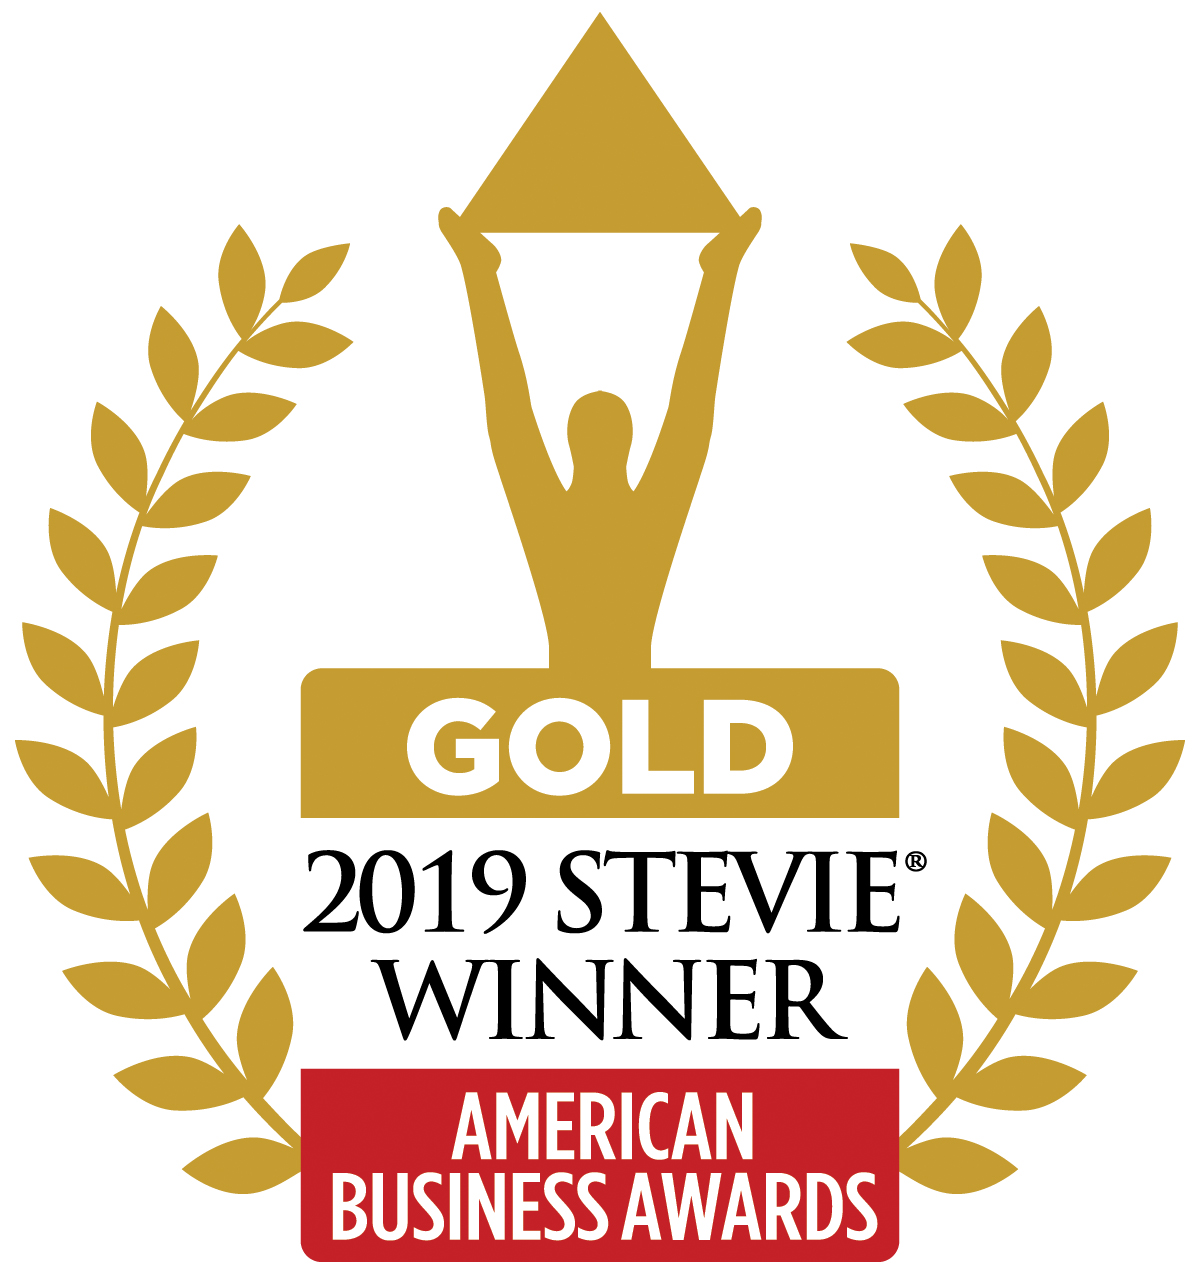 THE AMERICAN BUSINESS AWARDS - 2019 GOLD STEVIE